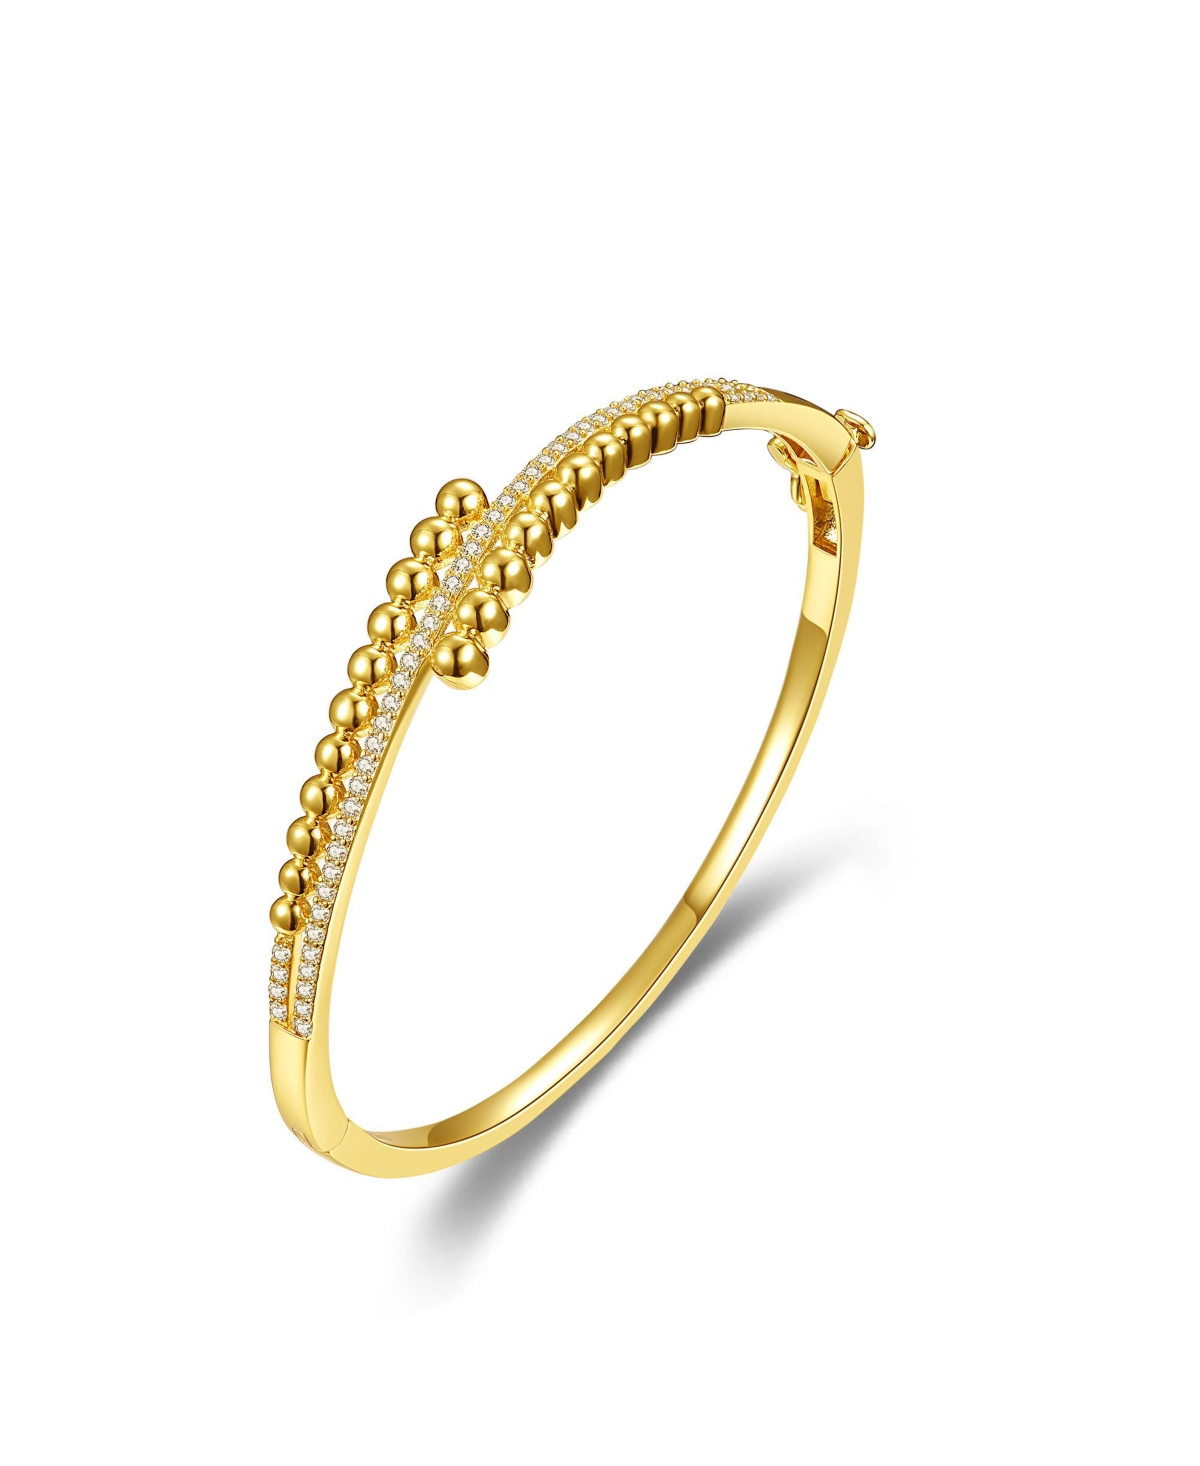 Sterling Silver with 14K Yellow Gold-Plated Cubic Zirconia Pave Bypass Bangle Bracelet - Gold